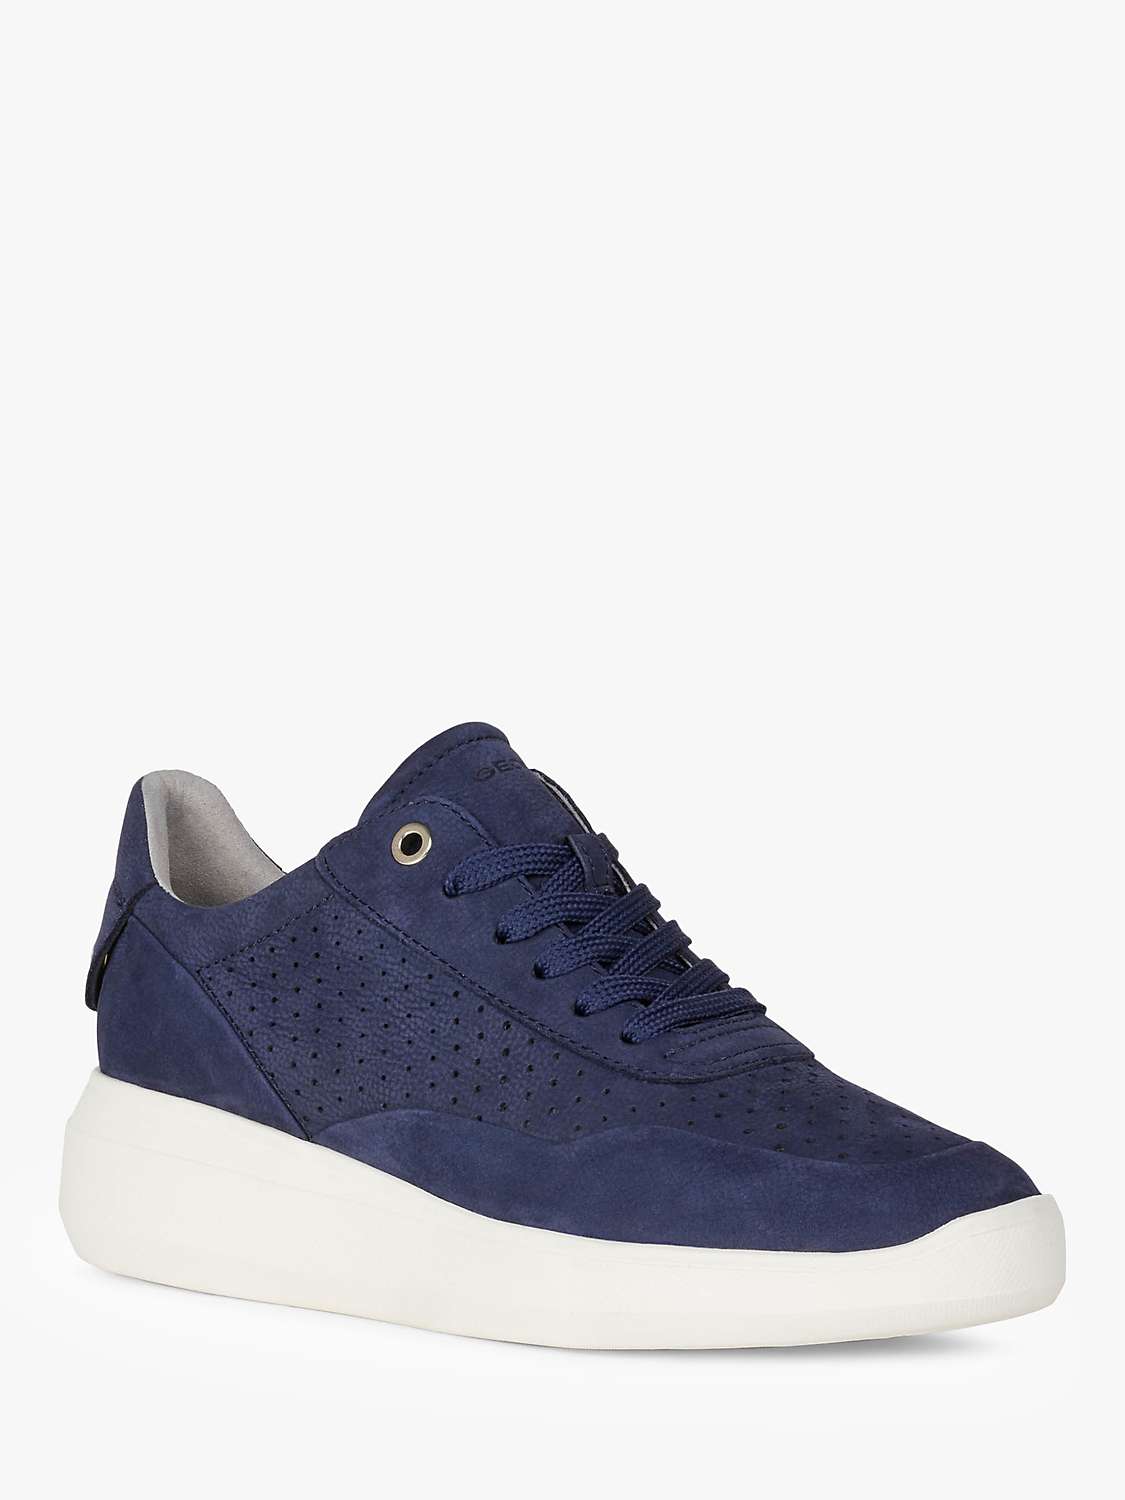 Buy Geox Women's Rubidia Wide Fit Perforated Leather Wedge Trainers Online at johnlewis.com